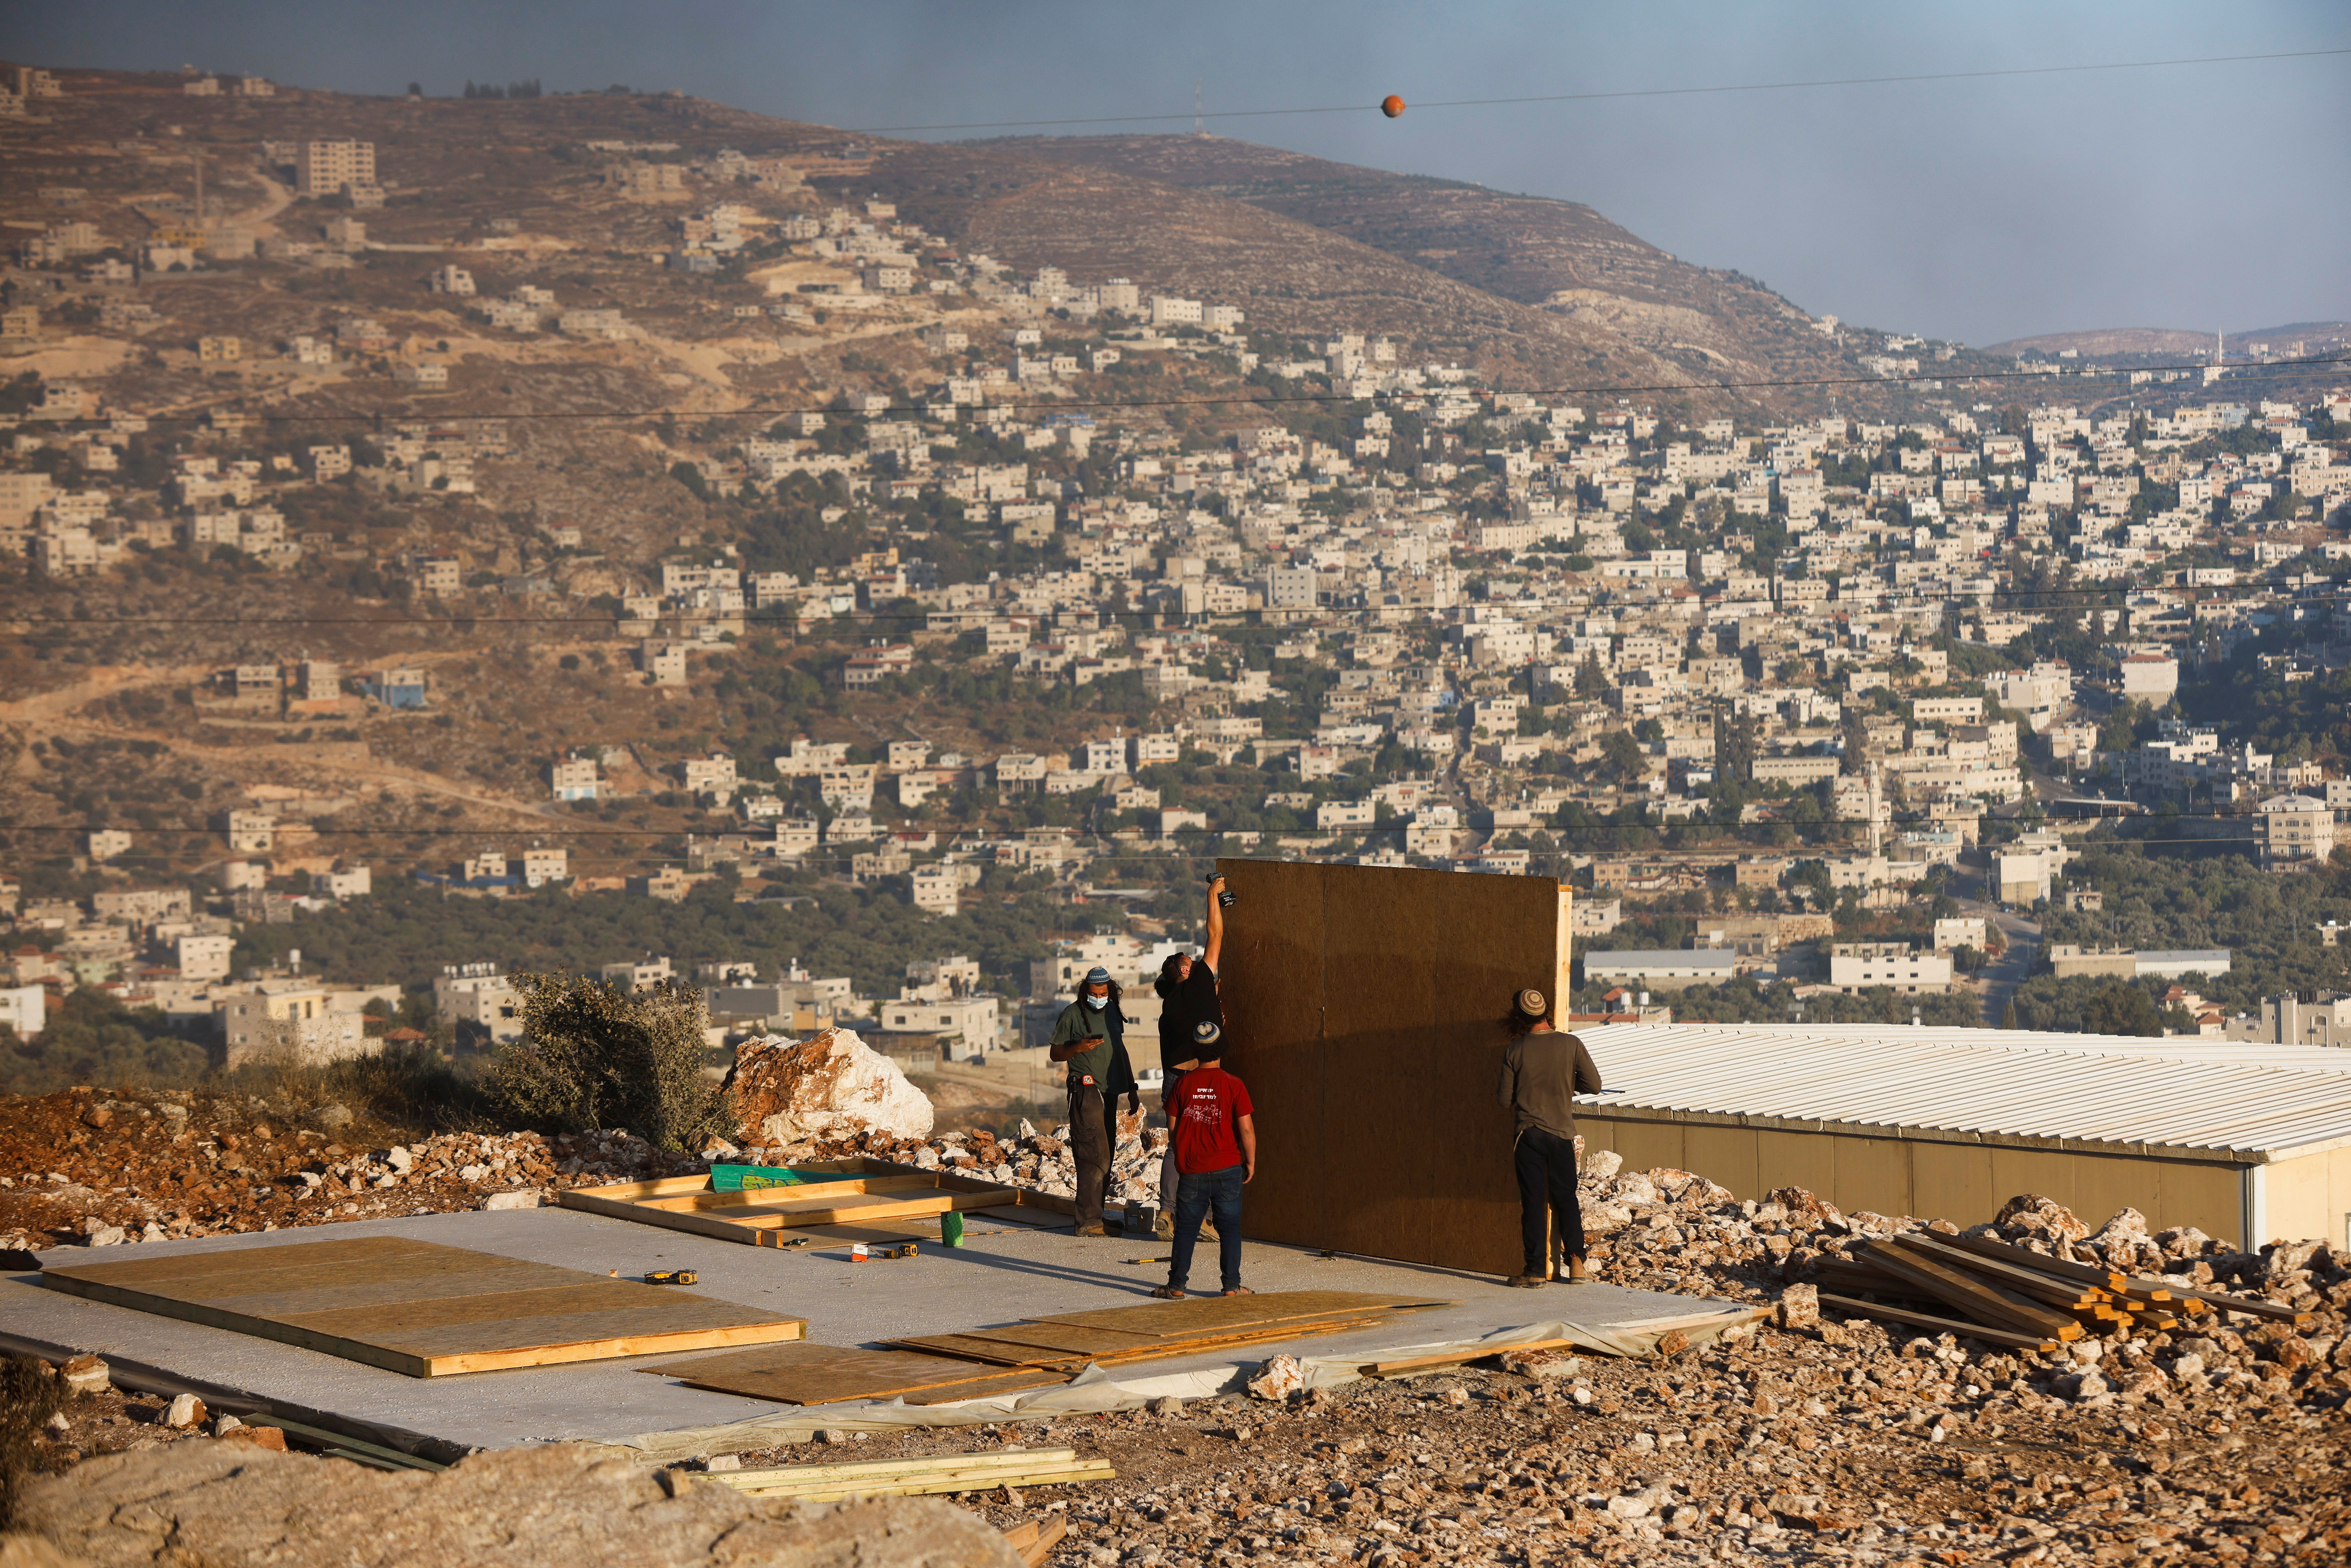 Jewish settlers youths construct a structure in Givat Eviatar, a new Israeli settler outpost, near the Palestinian village of Beita in the Israeli-occupied West Bank June 23, 2021. Picture taken June 23, 2021. REUTERS/Amir Cohen